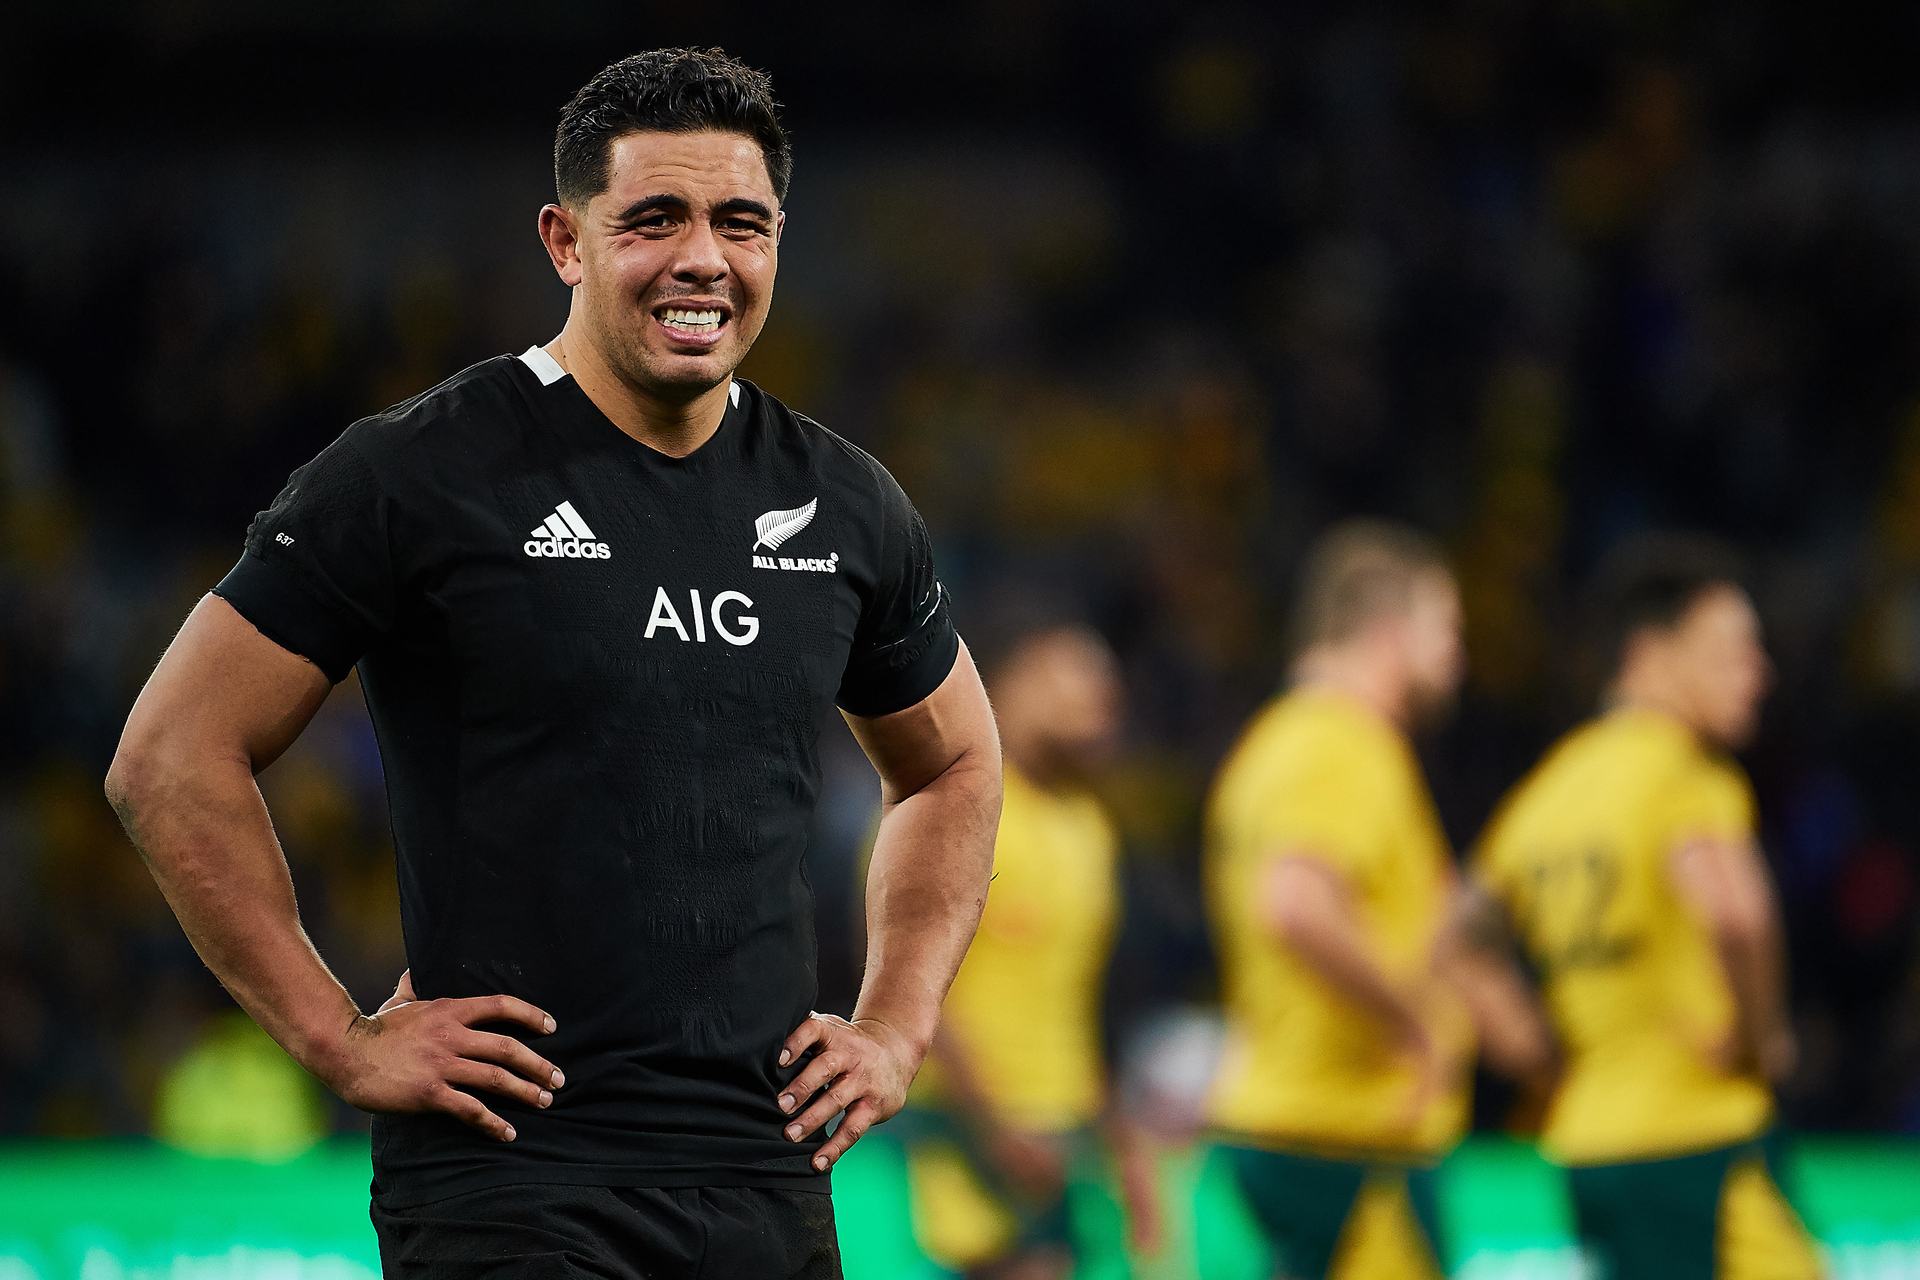 Dan Carter, New Zealand Rugby Player – Basic, Professional career and  Personal Details